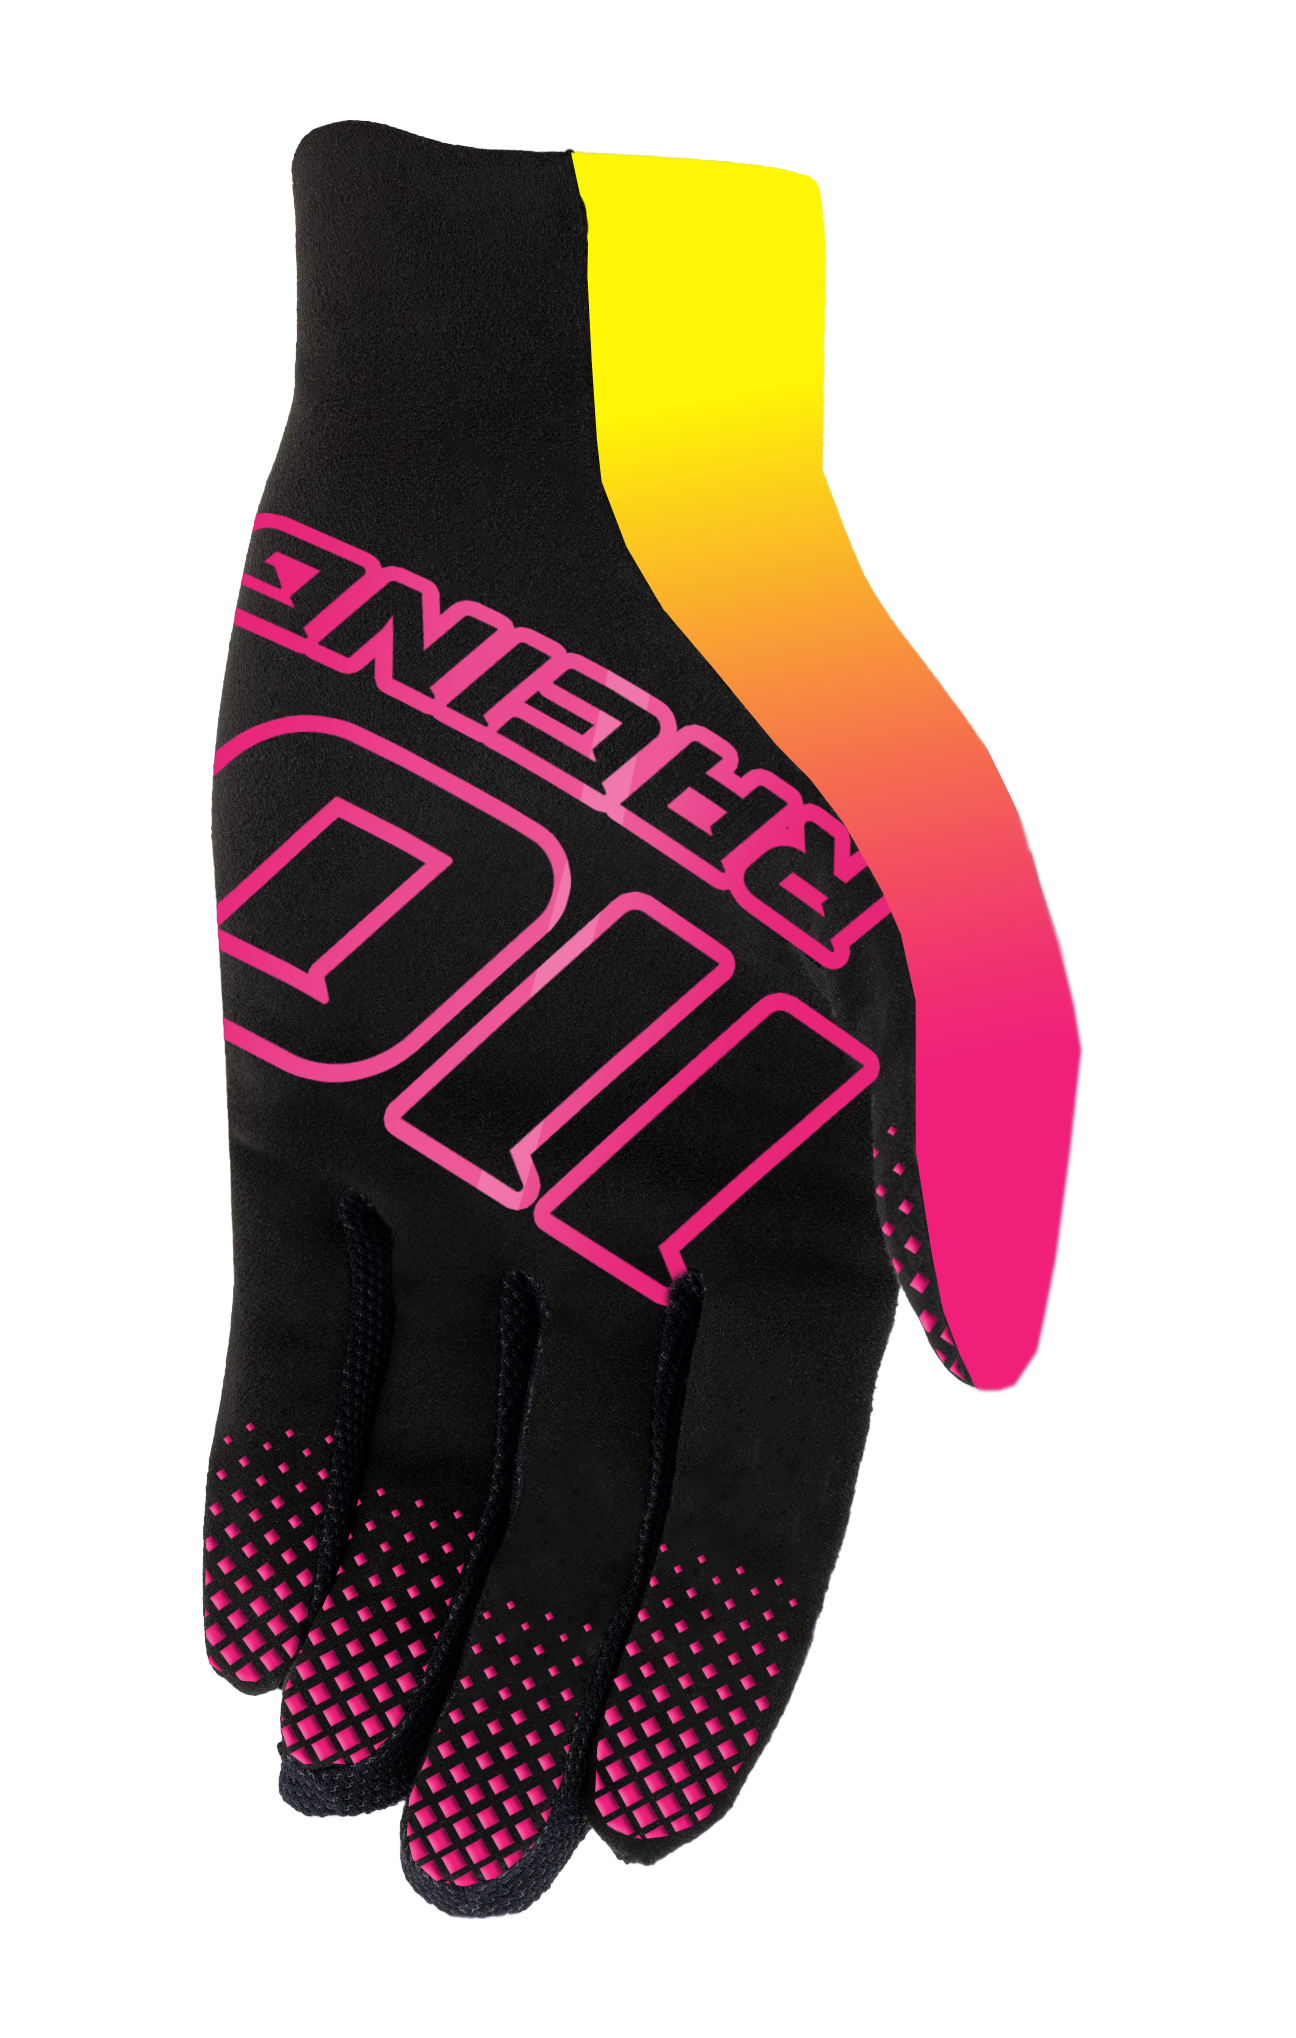 110 RACING // LE23 ICONIC GLOVE - PINK